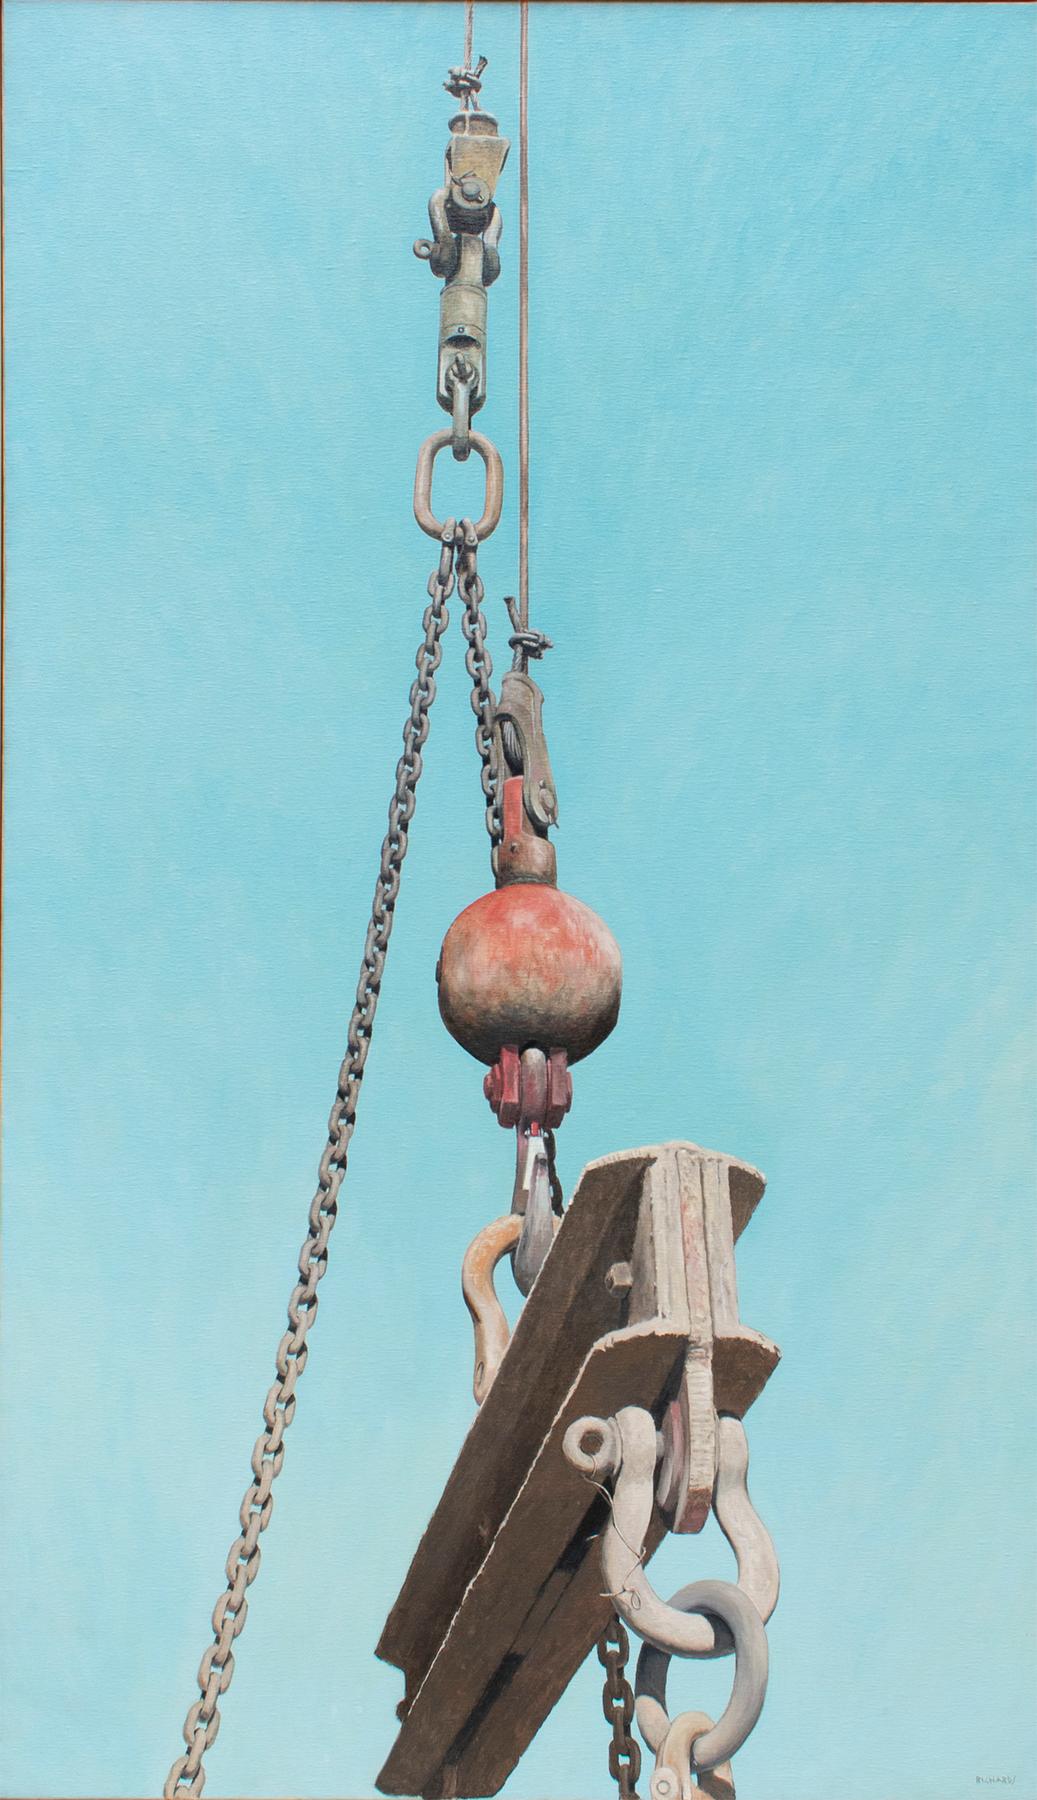 Crane: Large Photo-Realist Painting of Industrial Red Ball & Grey Crane on Blue